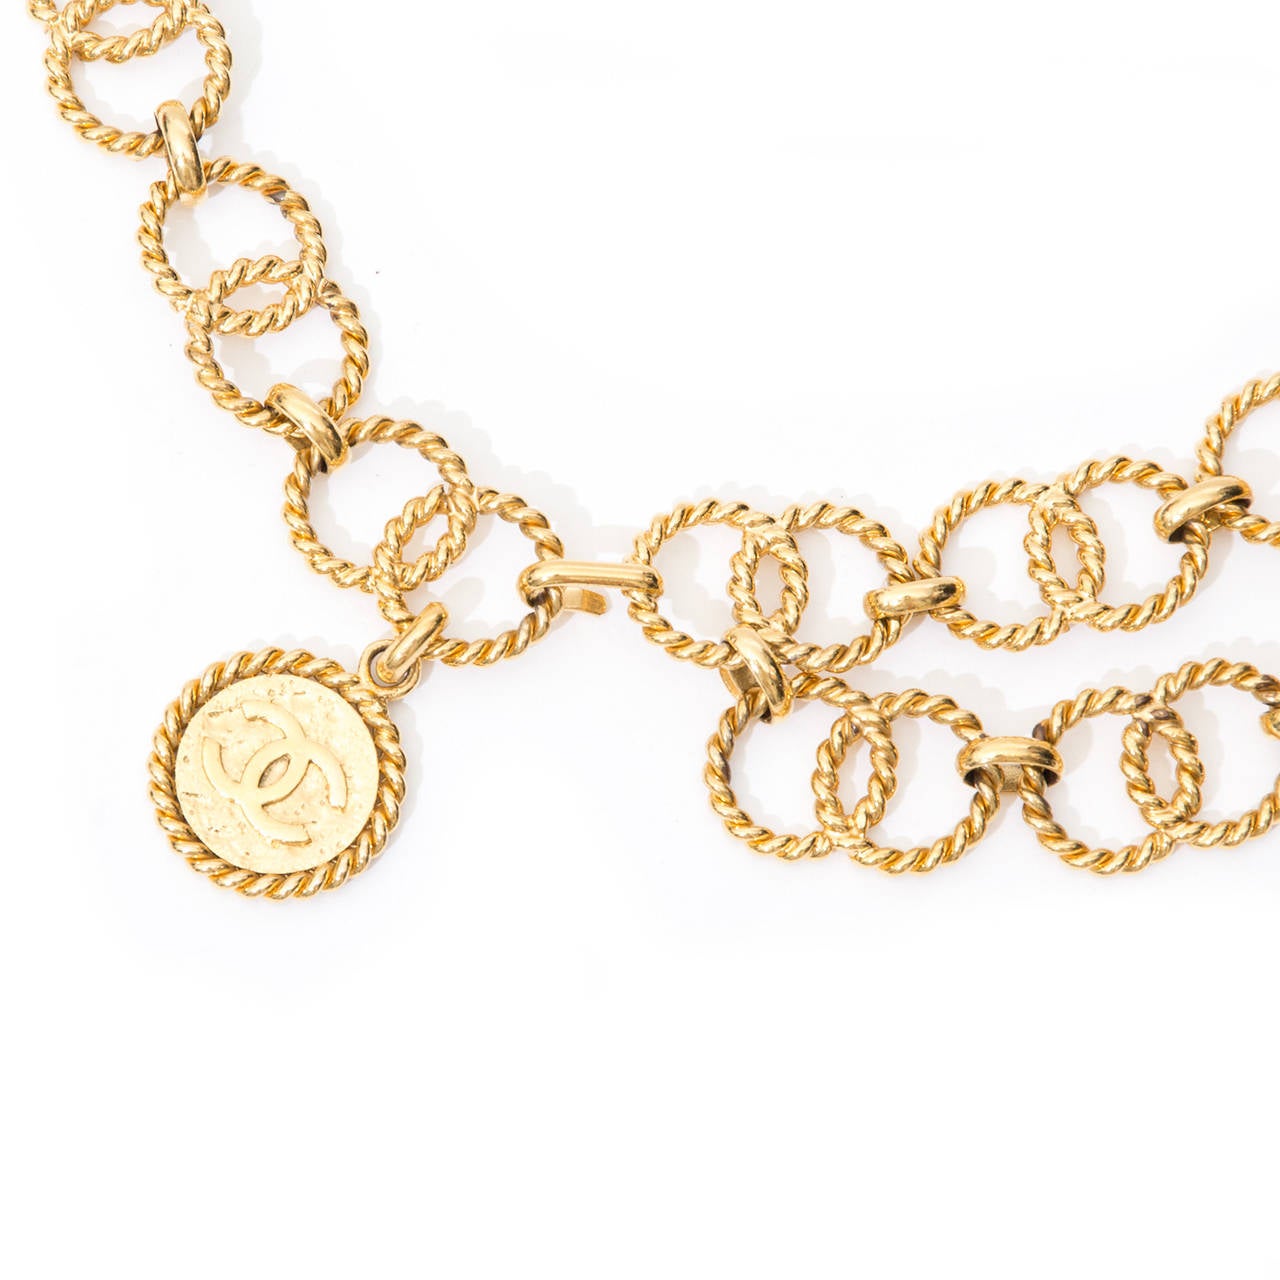 This Chanel Gold toned chain belt/necklace will make any outfit complete. 
Wear it as a belt or as a necklace.